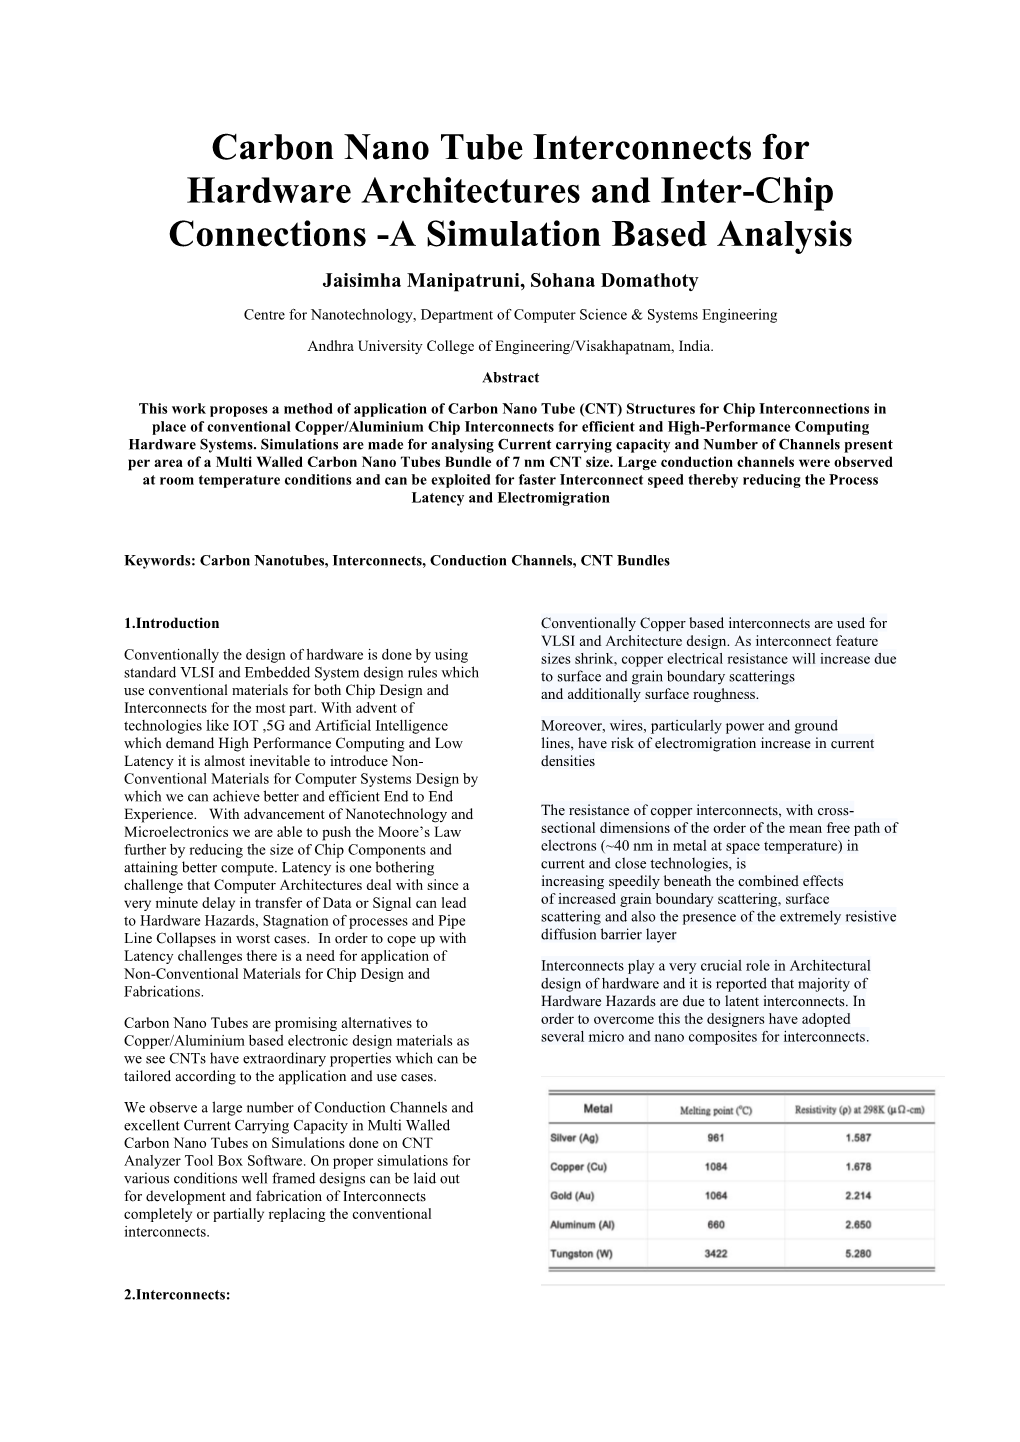 Carbon Nano Tube Interconnects for Hardware Architectures and Inter-Chip Connections -A Simulation Based Analysis Jaisimha Manipatruni, Sohana Domathoty